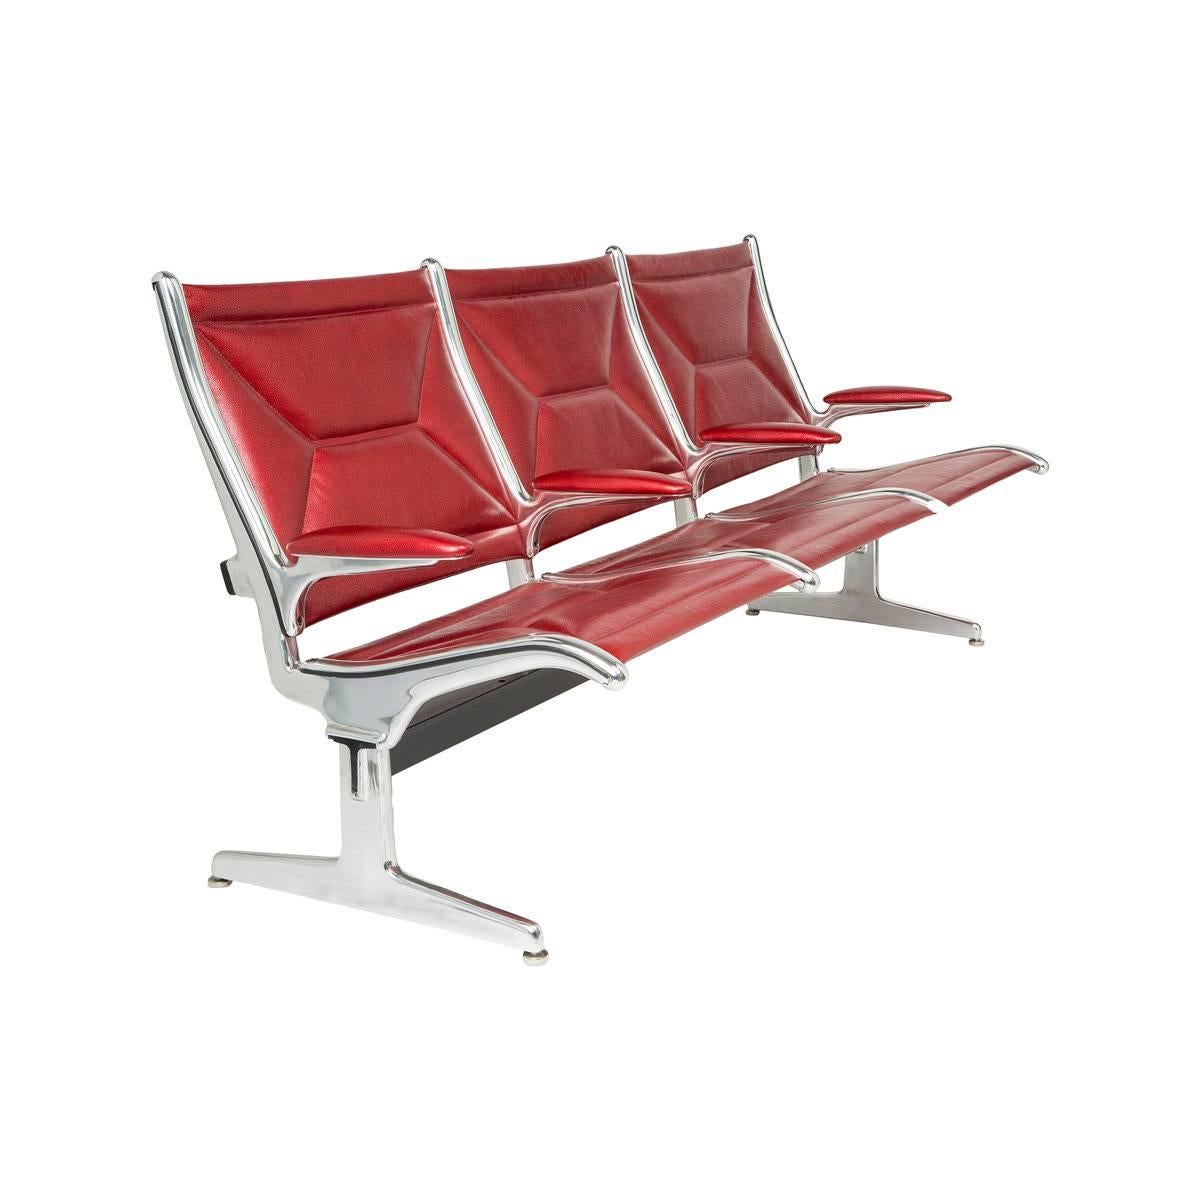 *Price Updated to be a QTY of 3*

Ray and Charles Eames were commissioned to design the perfect utilitarian seating for the first international airports in 1962. Created for comfort and convenience, this chair is iconic and has never before been